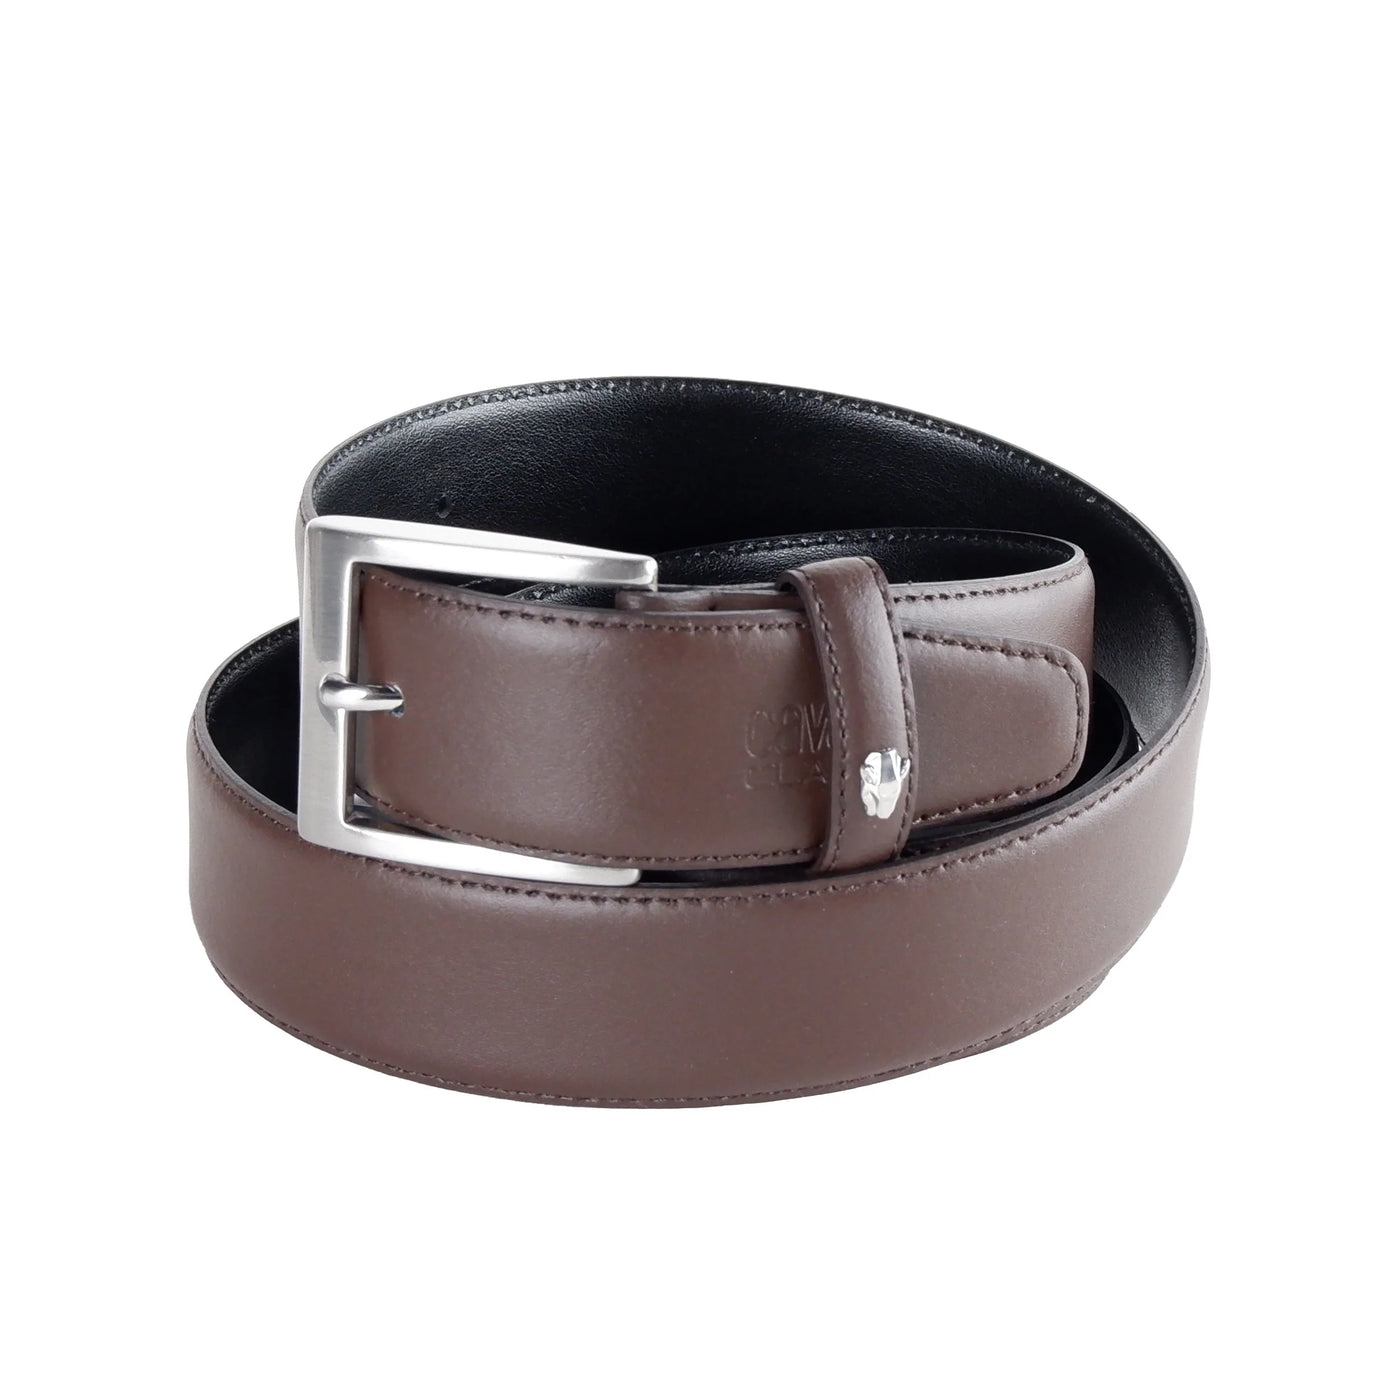 Cavalli Class  Belt #men, 110 cm / 44 Inches, Belts - Men - Accessories, Brown, Cavalli Class, feed-agegroup-adult, feed-color-Brown, feed-gender-male at SEYMAYKA